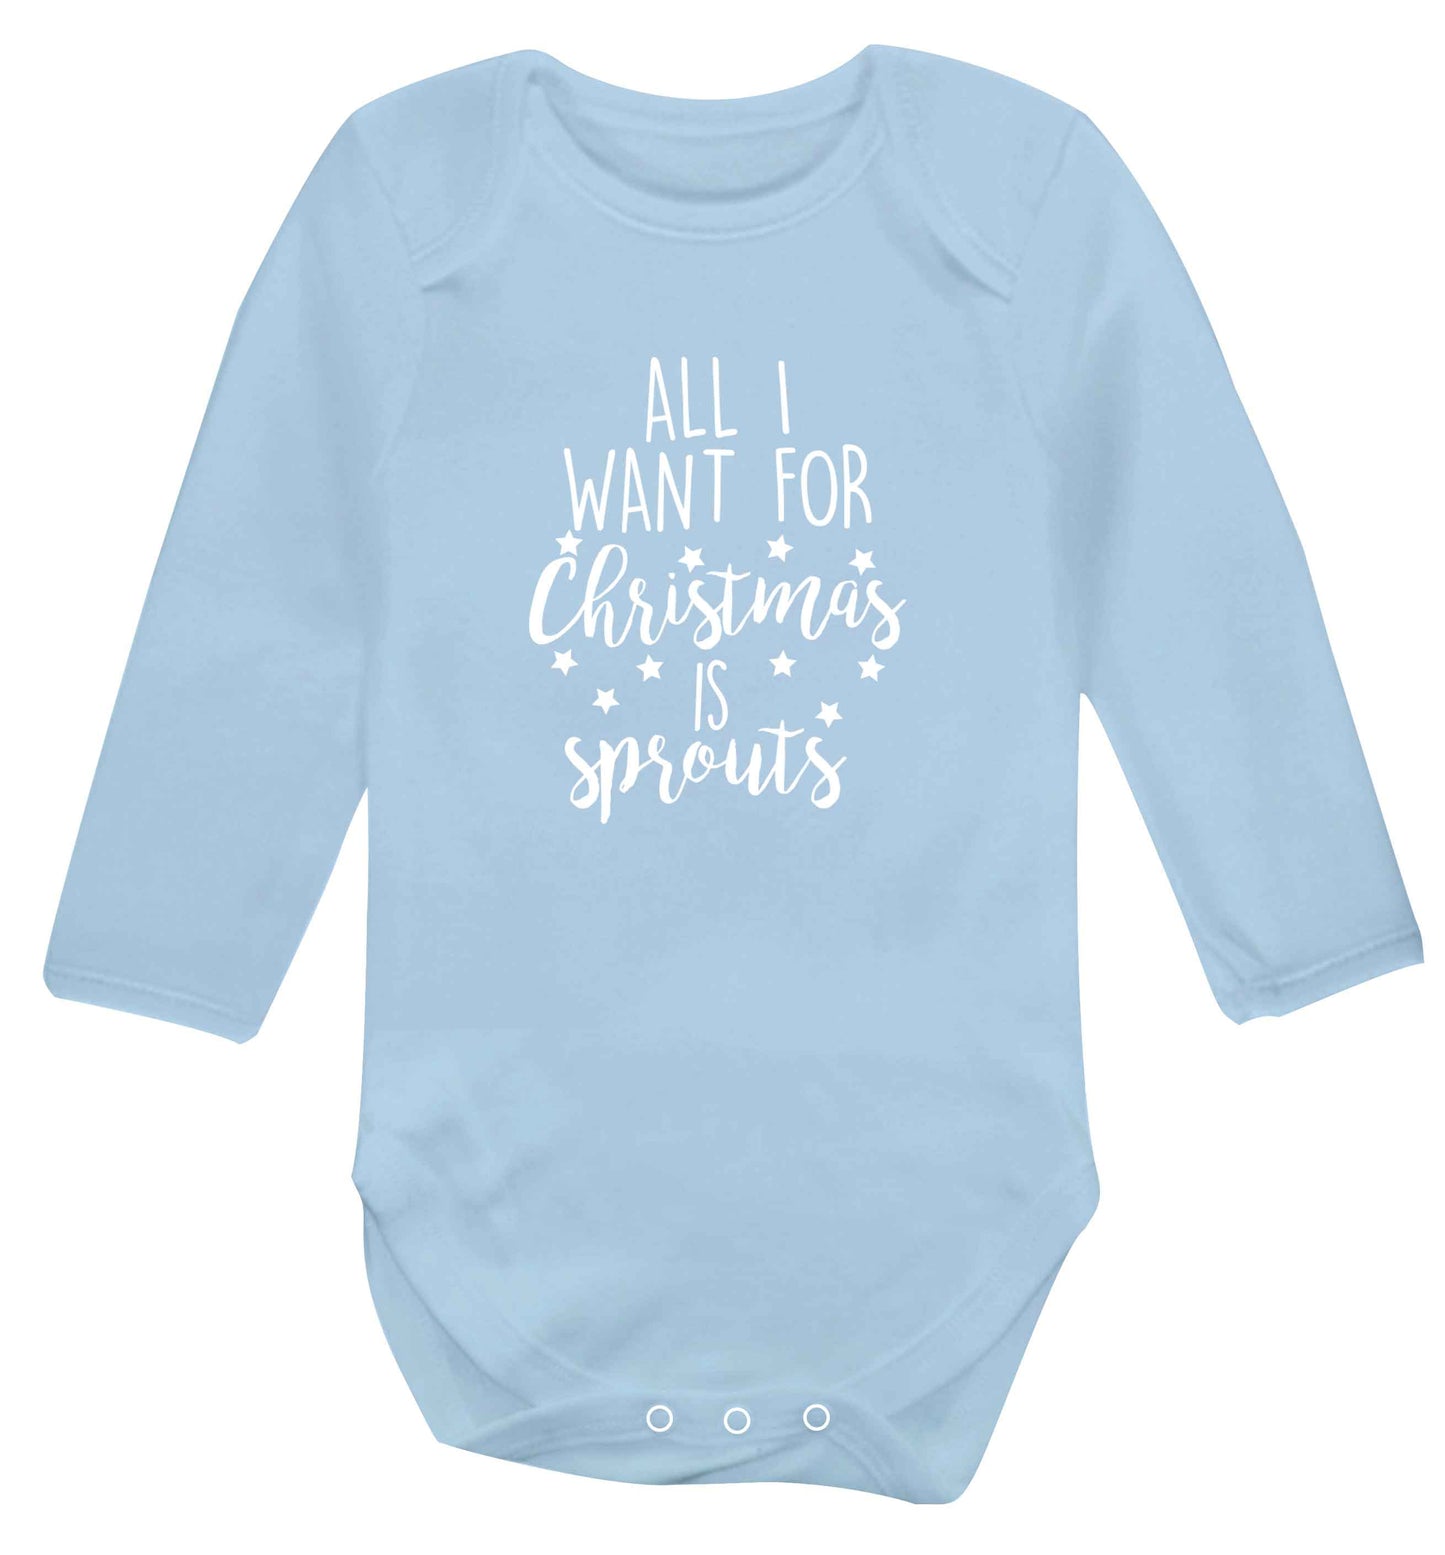 All I want for Christmas is sprouts baby vest long sleeved pale blue 6-12 months